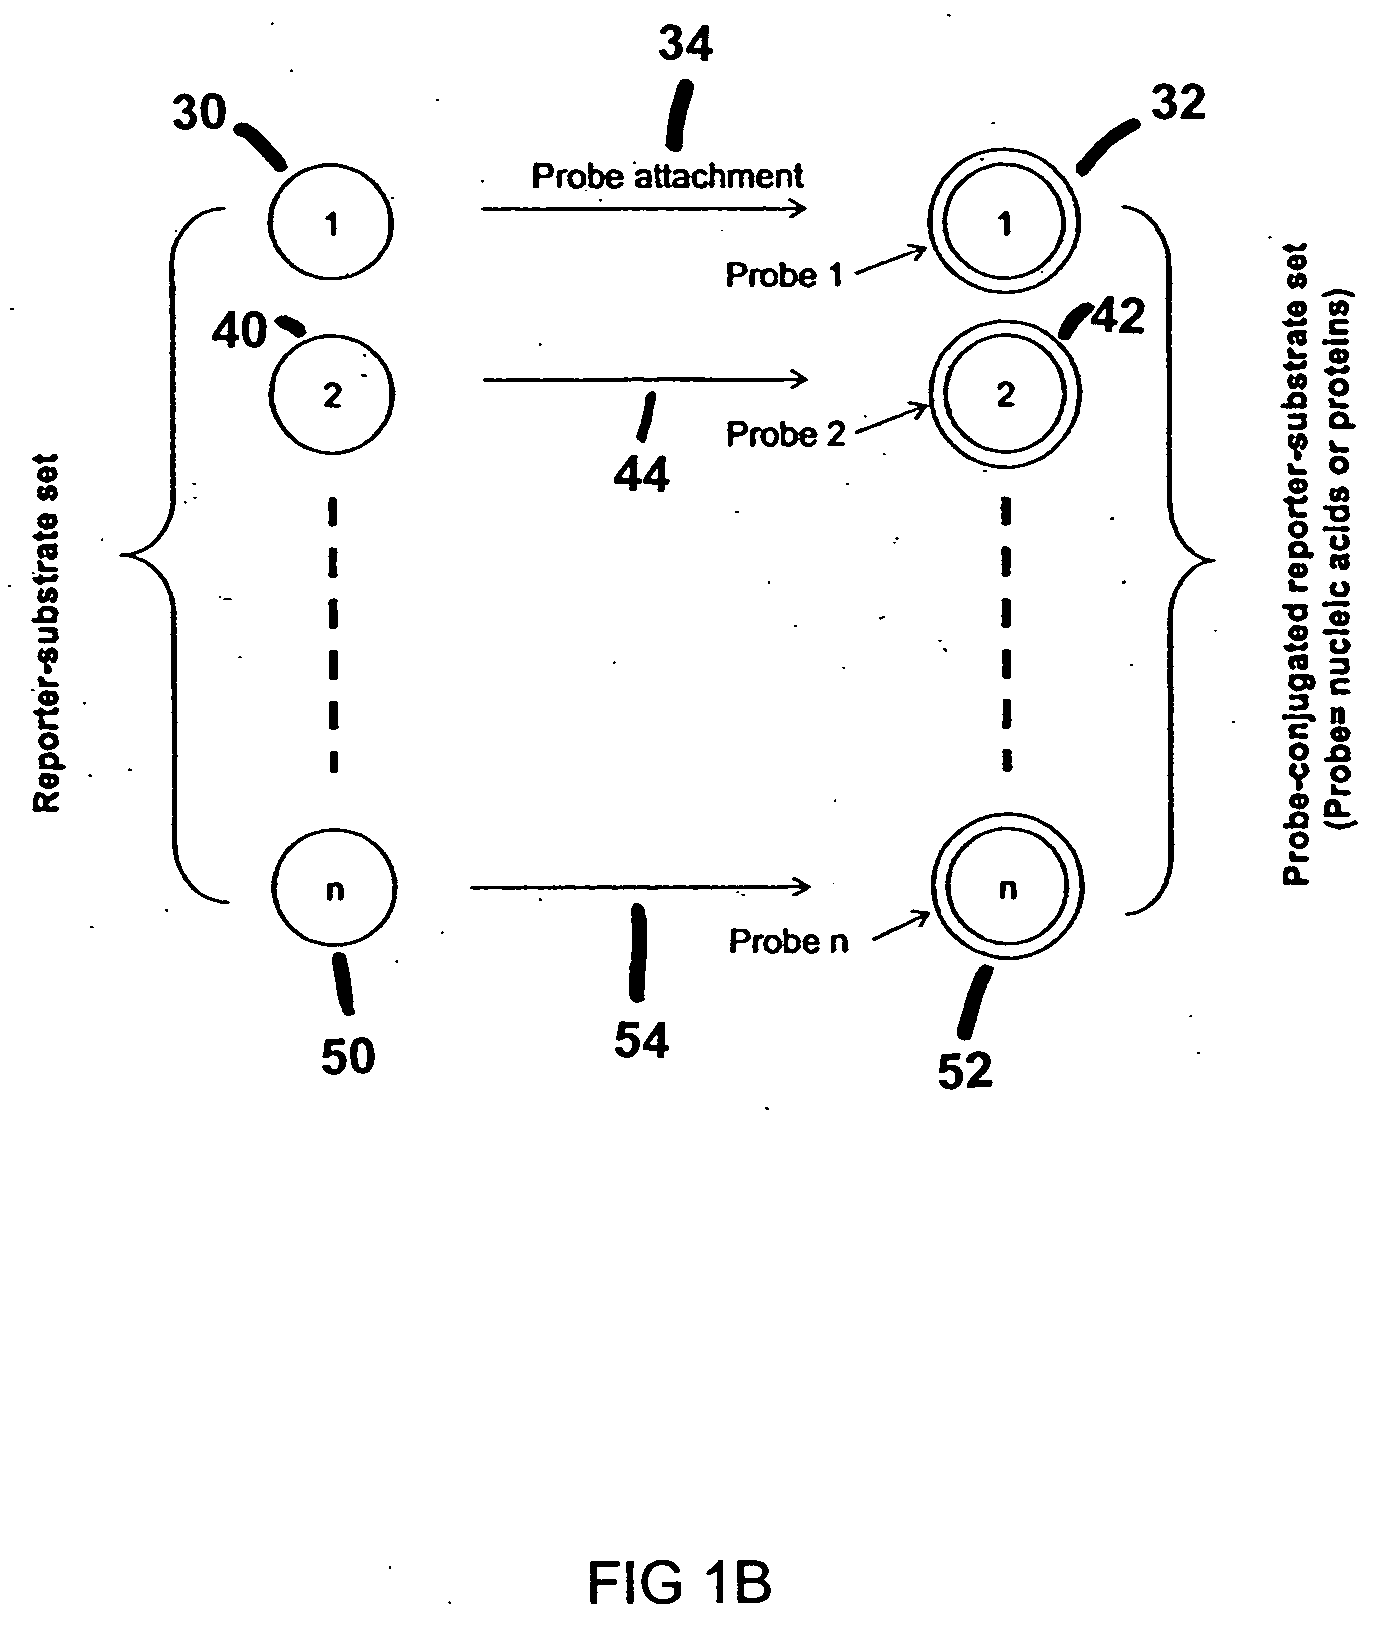 Methods and apparatus for SERS assay of biological analytes